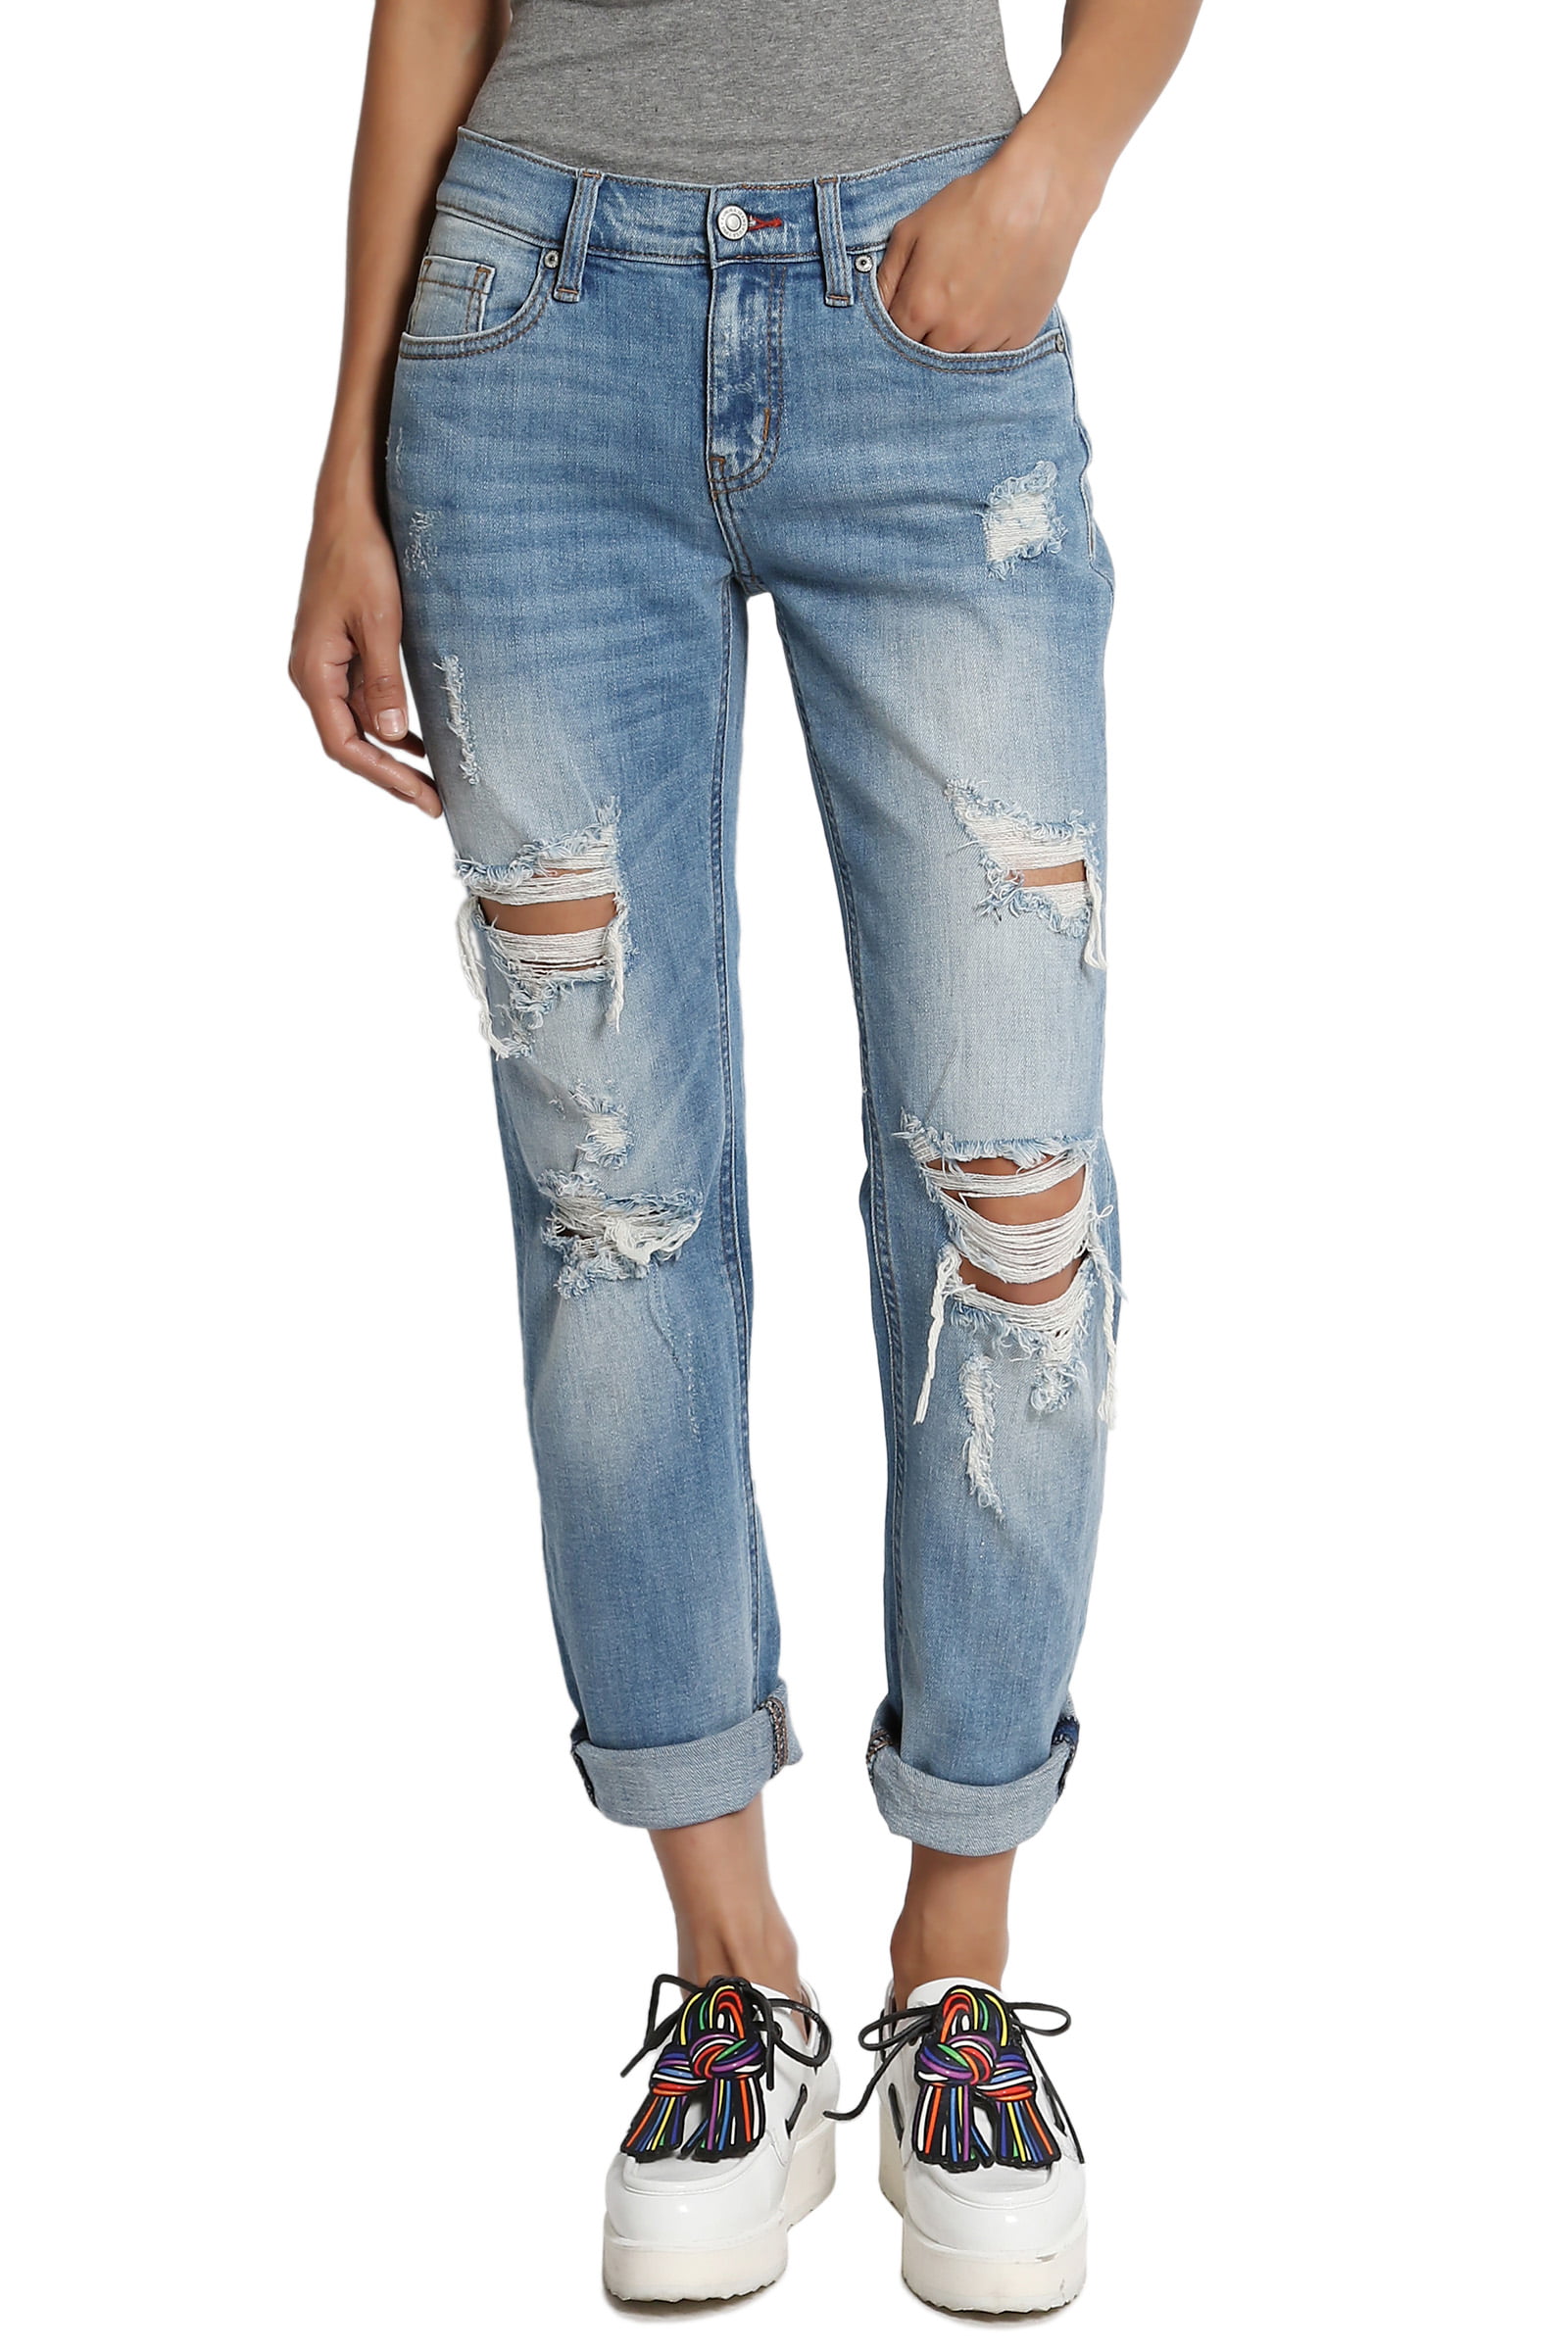 Themogan Womens Distressed Destructed Washed Denim Mid Rise Relaxed